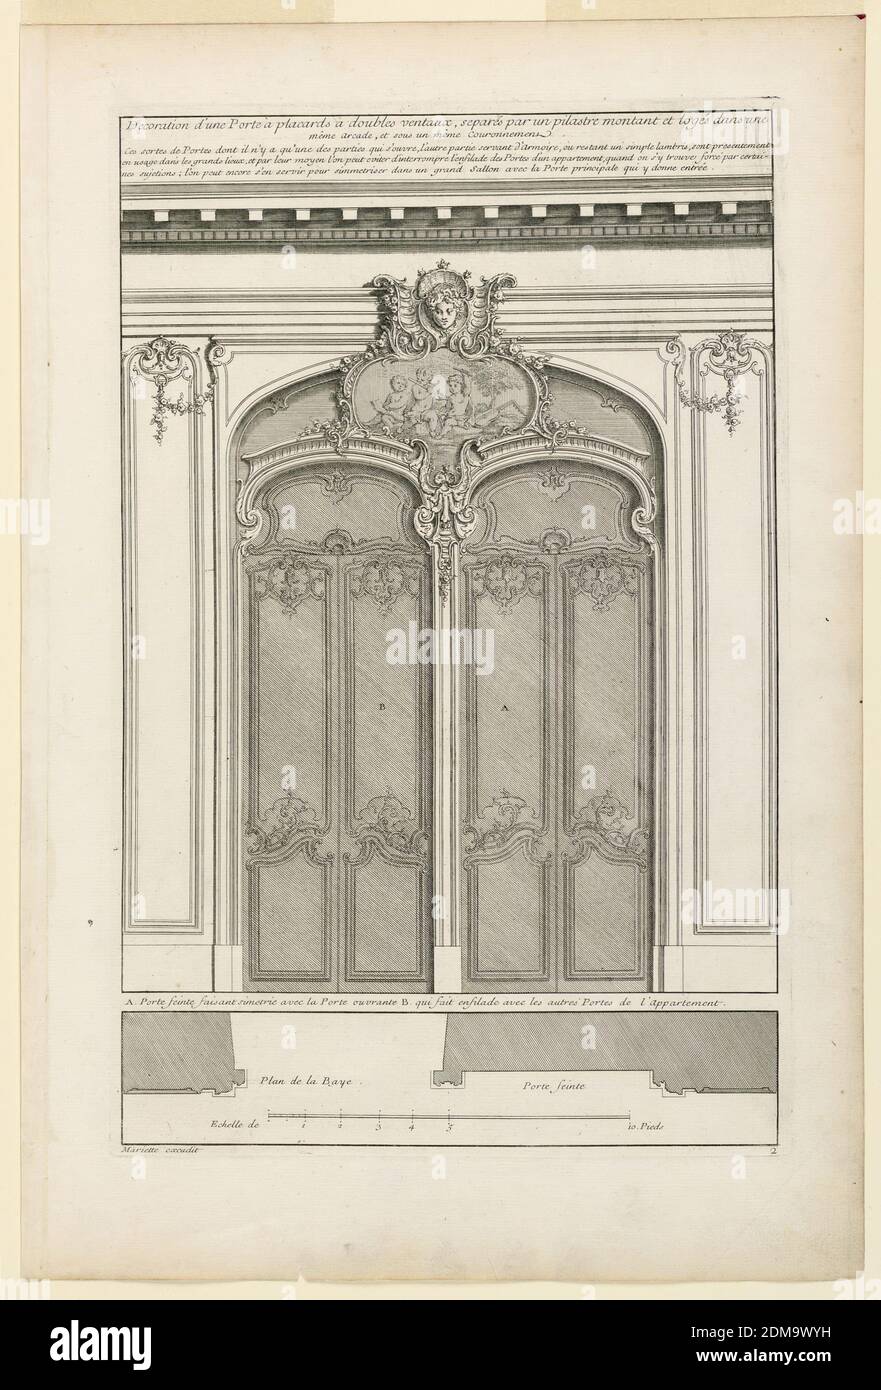 Plate 2, 'Decoration d'une Porte à placards à double ventaux', Jacques-François Blondel, French, 1705 - 1774, Jean Mariette, 1660–1742, Engraving on paper, Two double doors within a joint arch. Both doors have a separate crowning rocaille volute above. Above, the overdoor with a painting surmounted by a carving of a female mask on a cartouche. Panels flanking doors with little volute and flower carving on top. Inscribed, along upper margin: title and 3 lines of explanation; lower left: 'Mariette excudit'; lower right: '2'. Explanation and inscriptions on the engraving., France, ca. 1727, Print Stock Photo